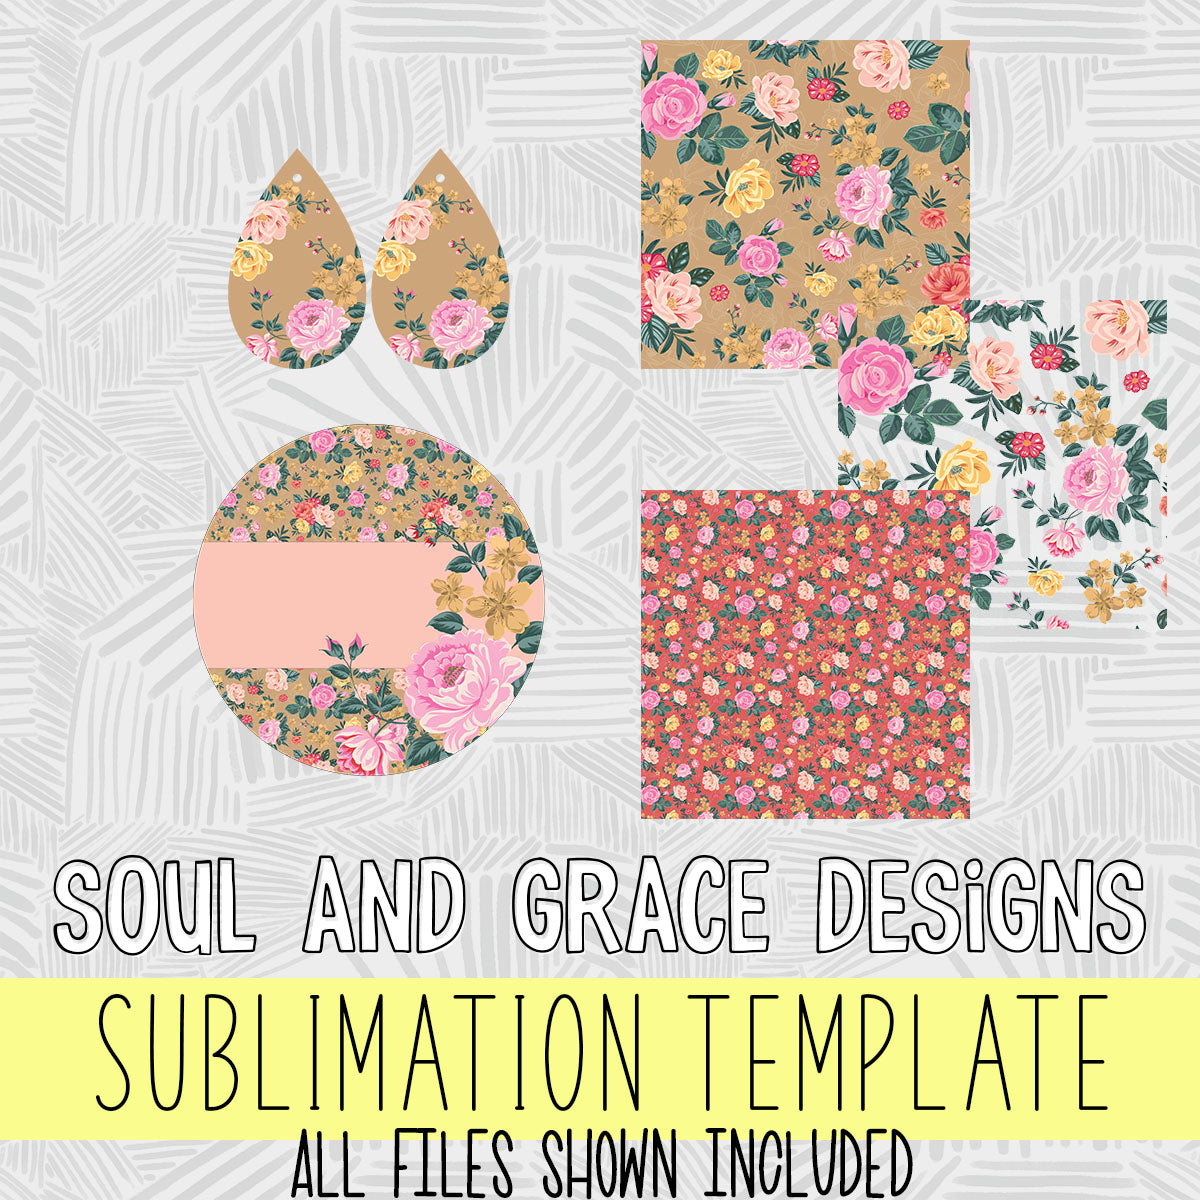 Romantic Floral Sublimation Template Set [Earrings, Circle, Seamless Overlay, Pattern Papers]